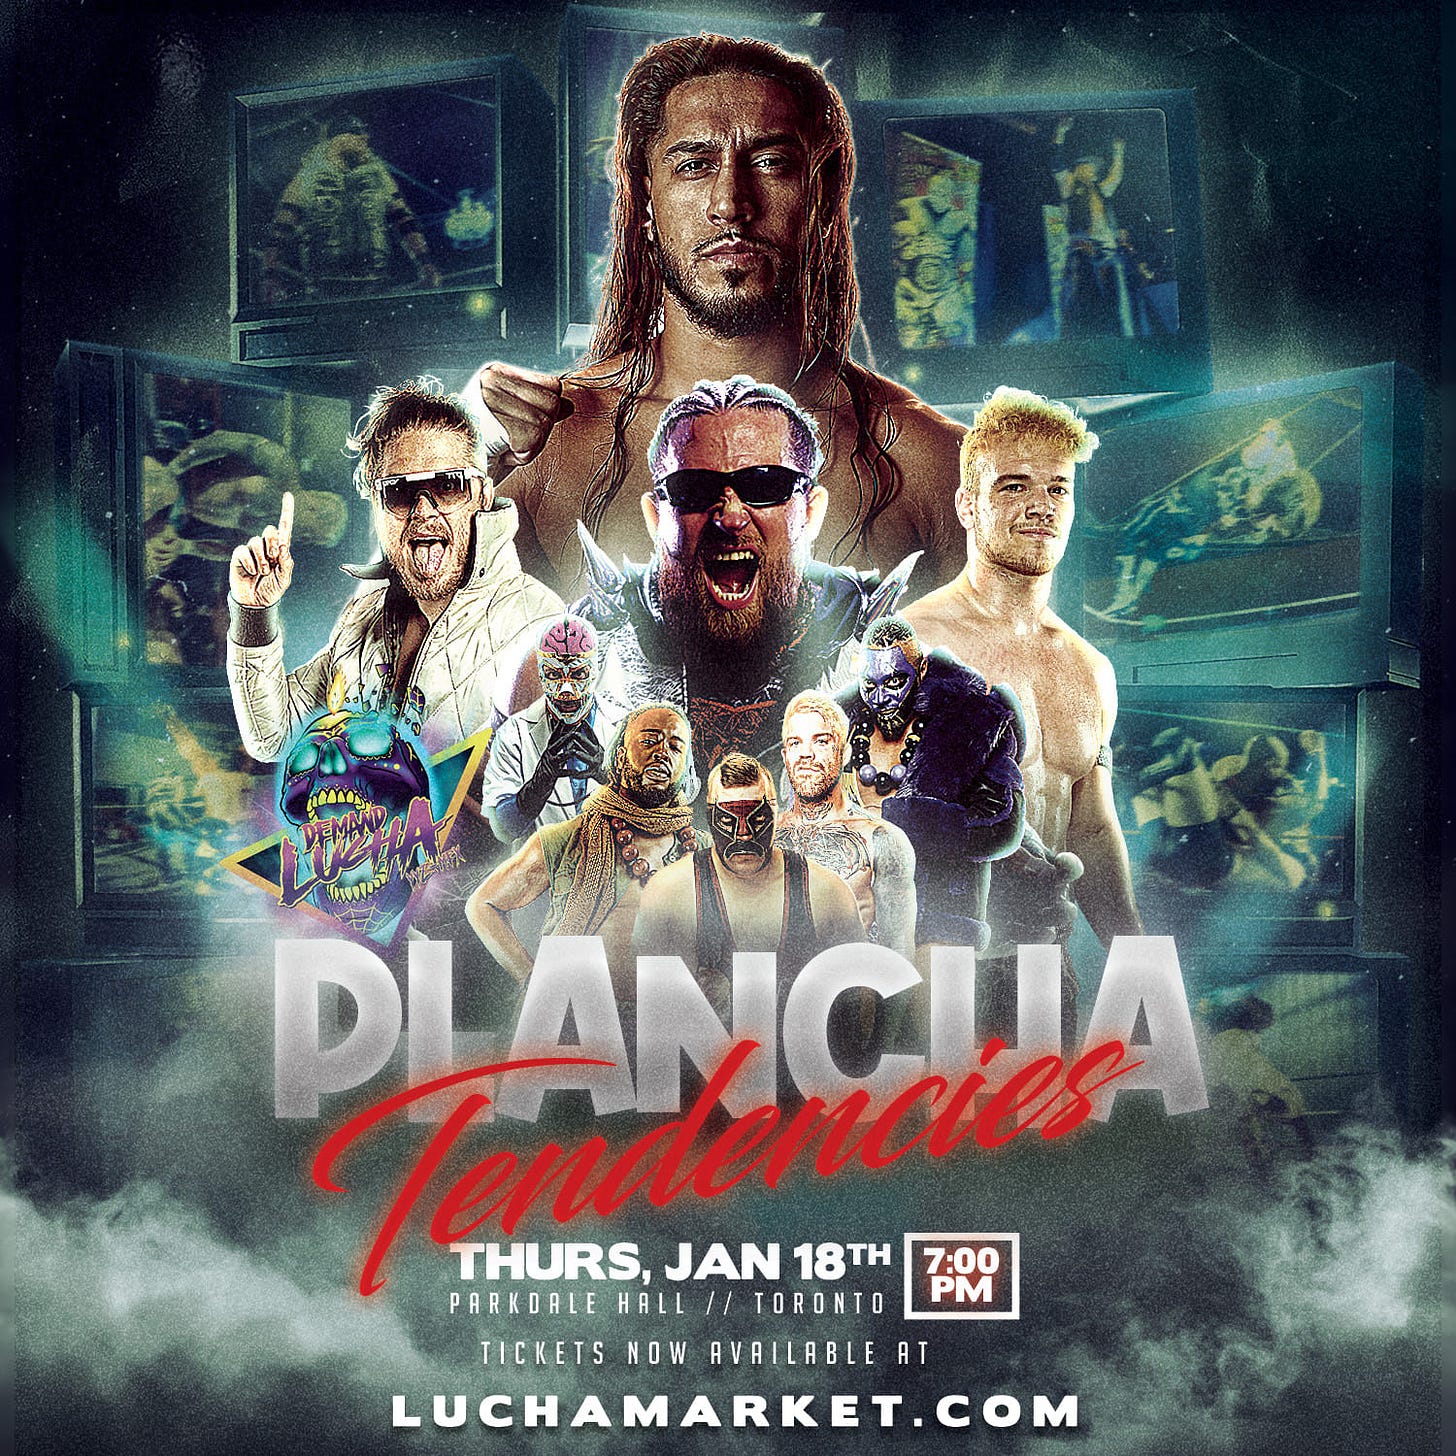 Demand Lucha Show Graphic Featuring Wrestlers